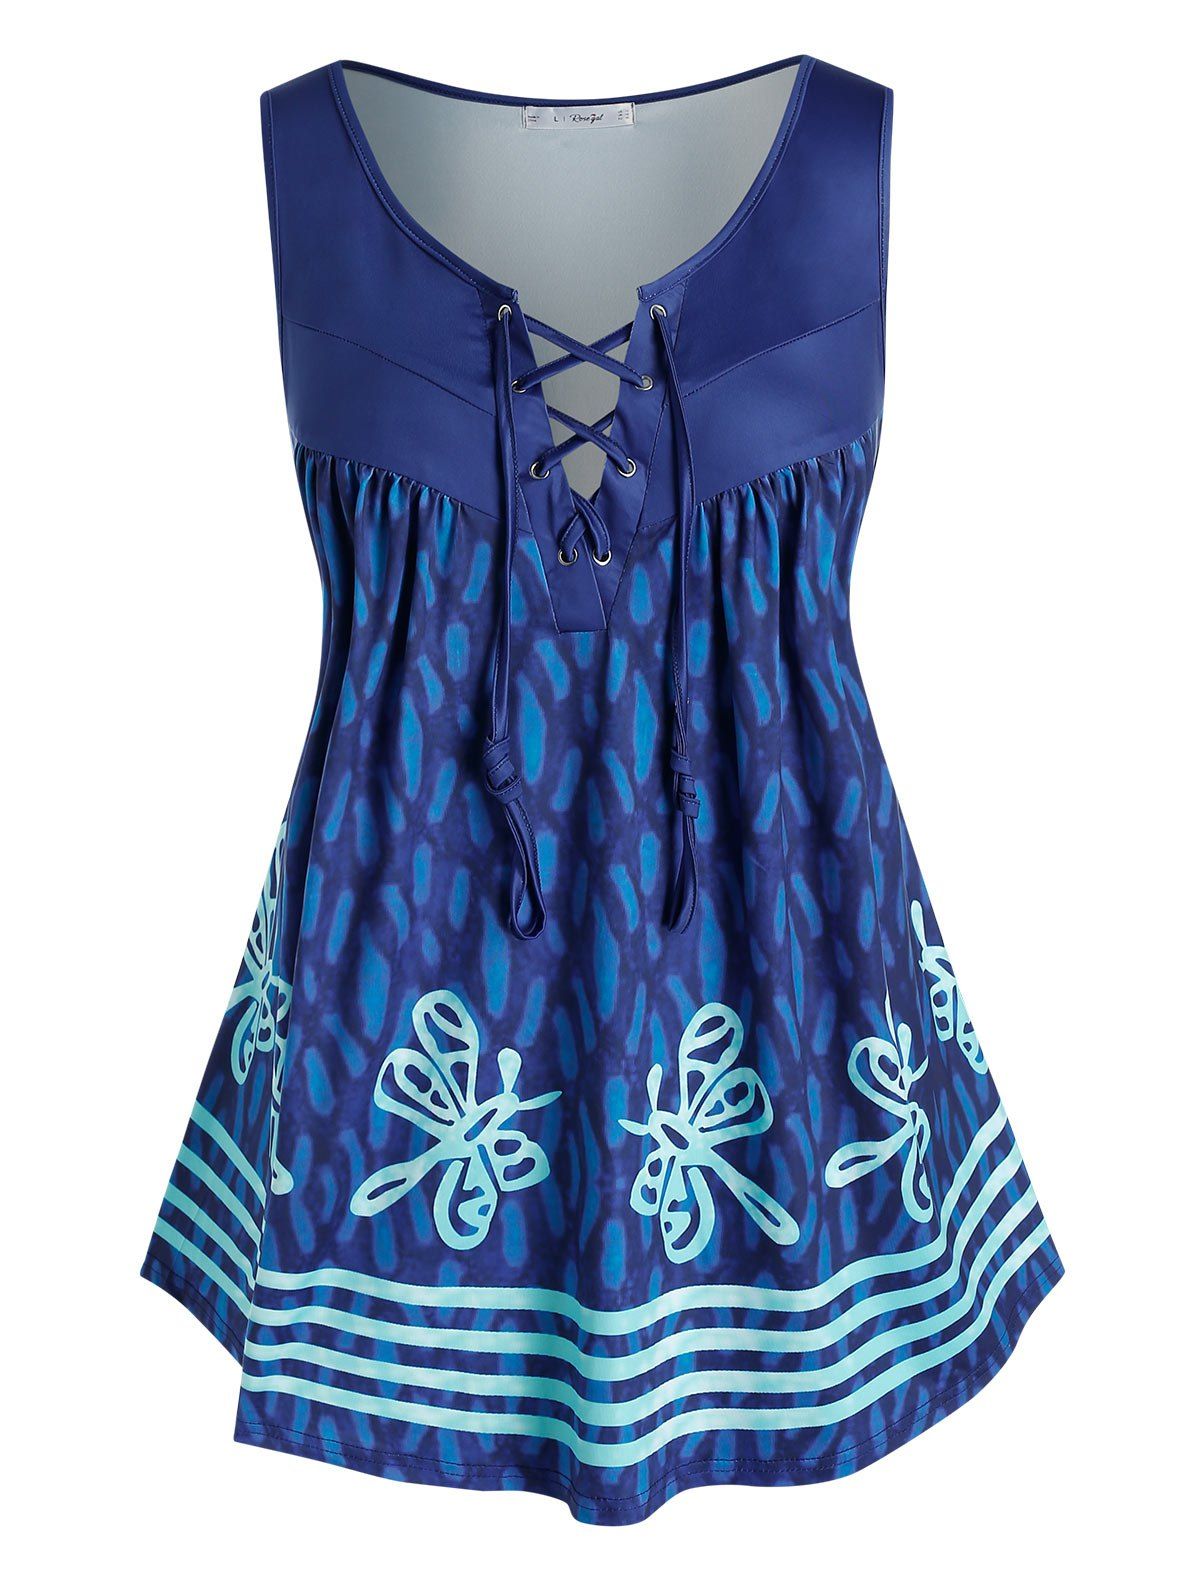 Plus Size Lace Up Butterfly Print Tent Tank Top - BLUE 4X